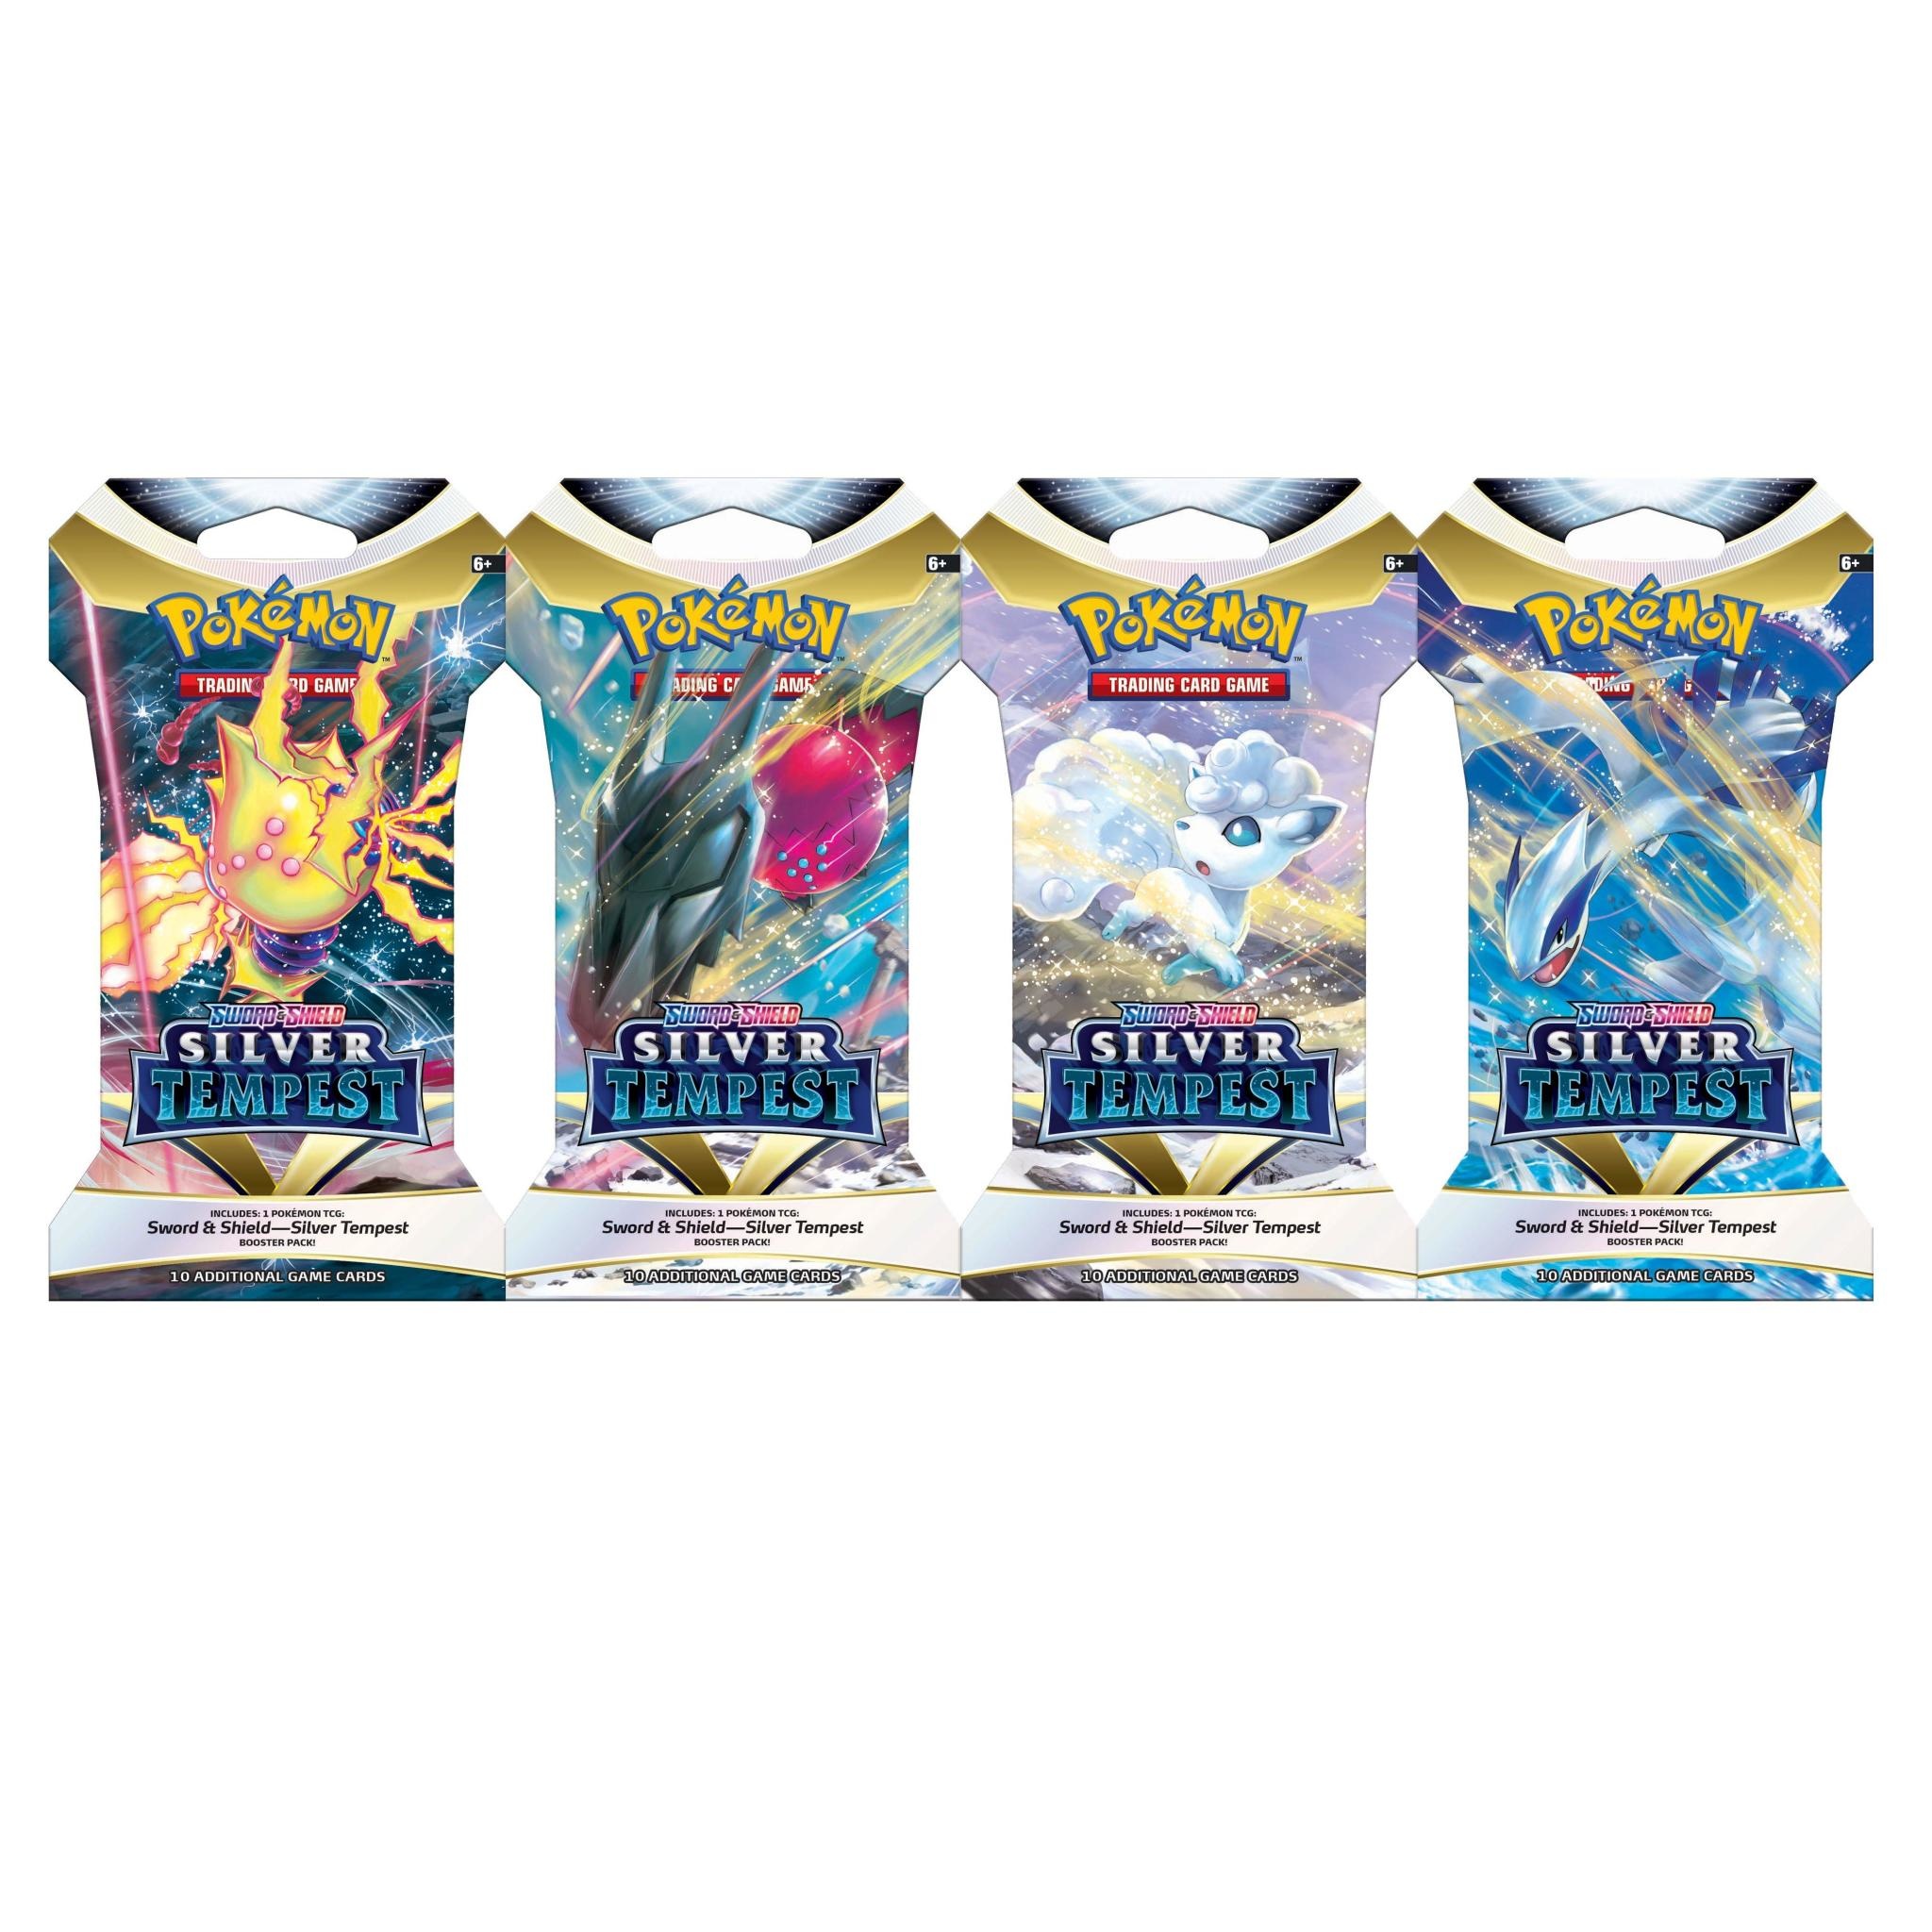 Pokemon Trading Card Game Silver Tempest Booster Pack